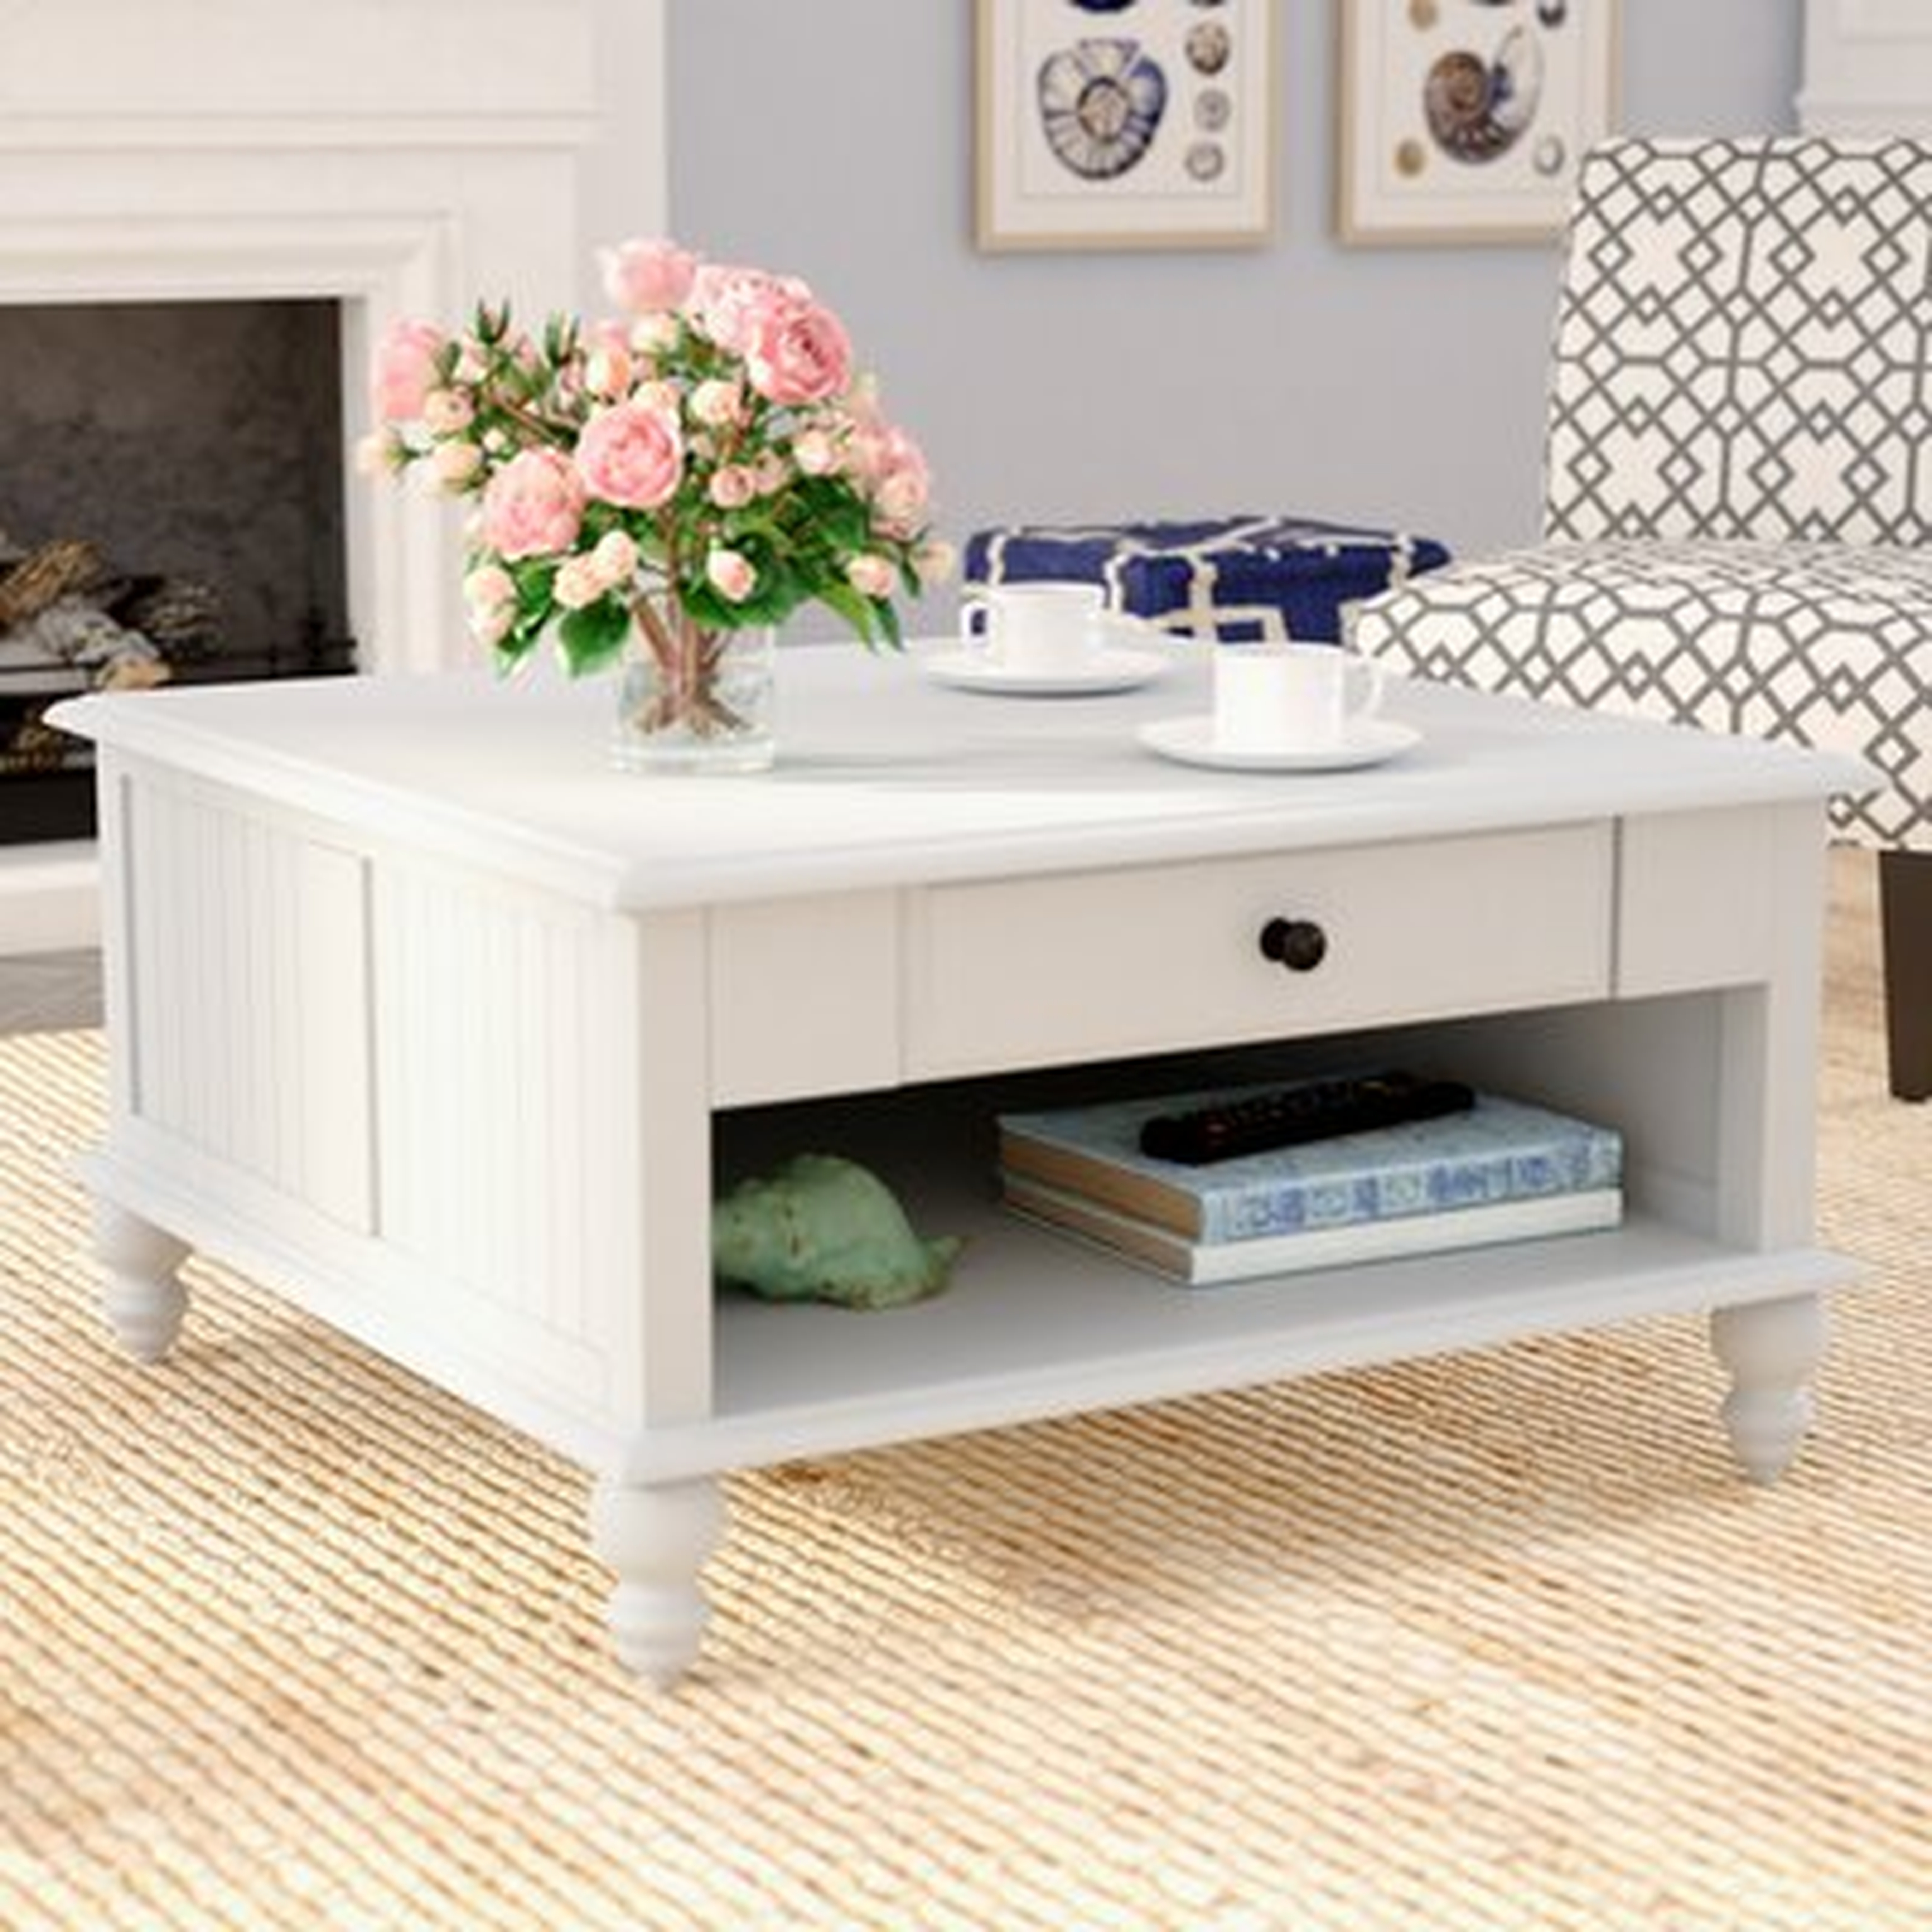 Witherspoon Coffee Table with Storage - Wayfair